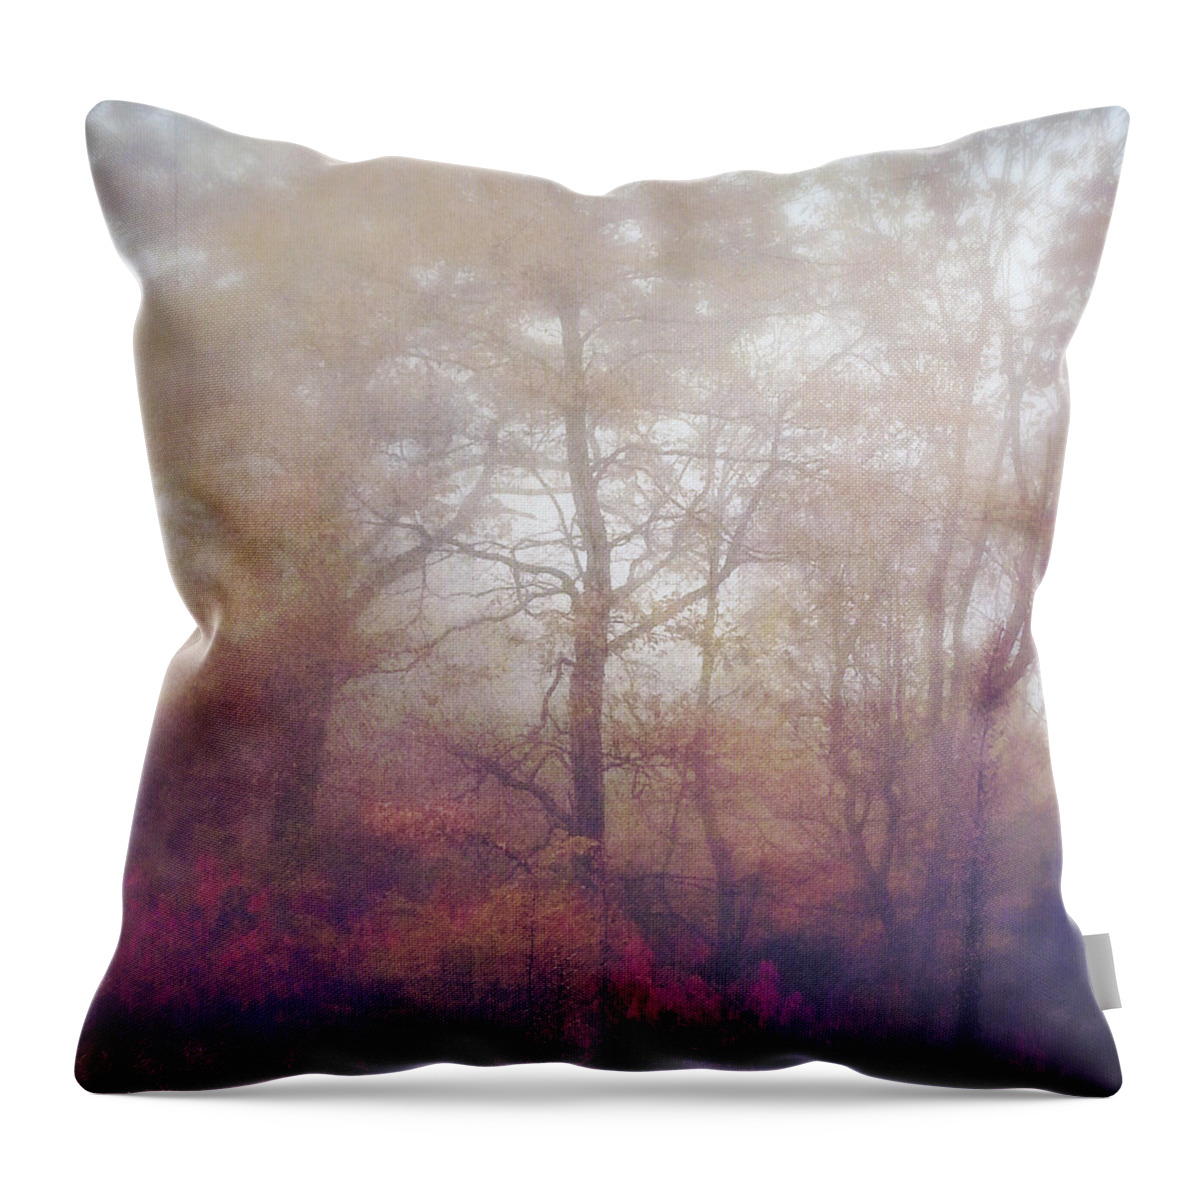 Photography Throw Pillow featuring the photograph Fog In Autumn Mountain Woods by Melissa D Johnston